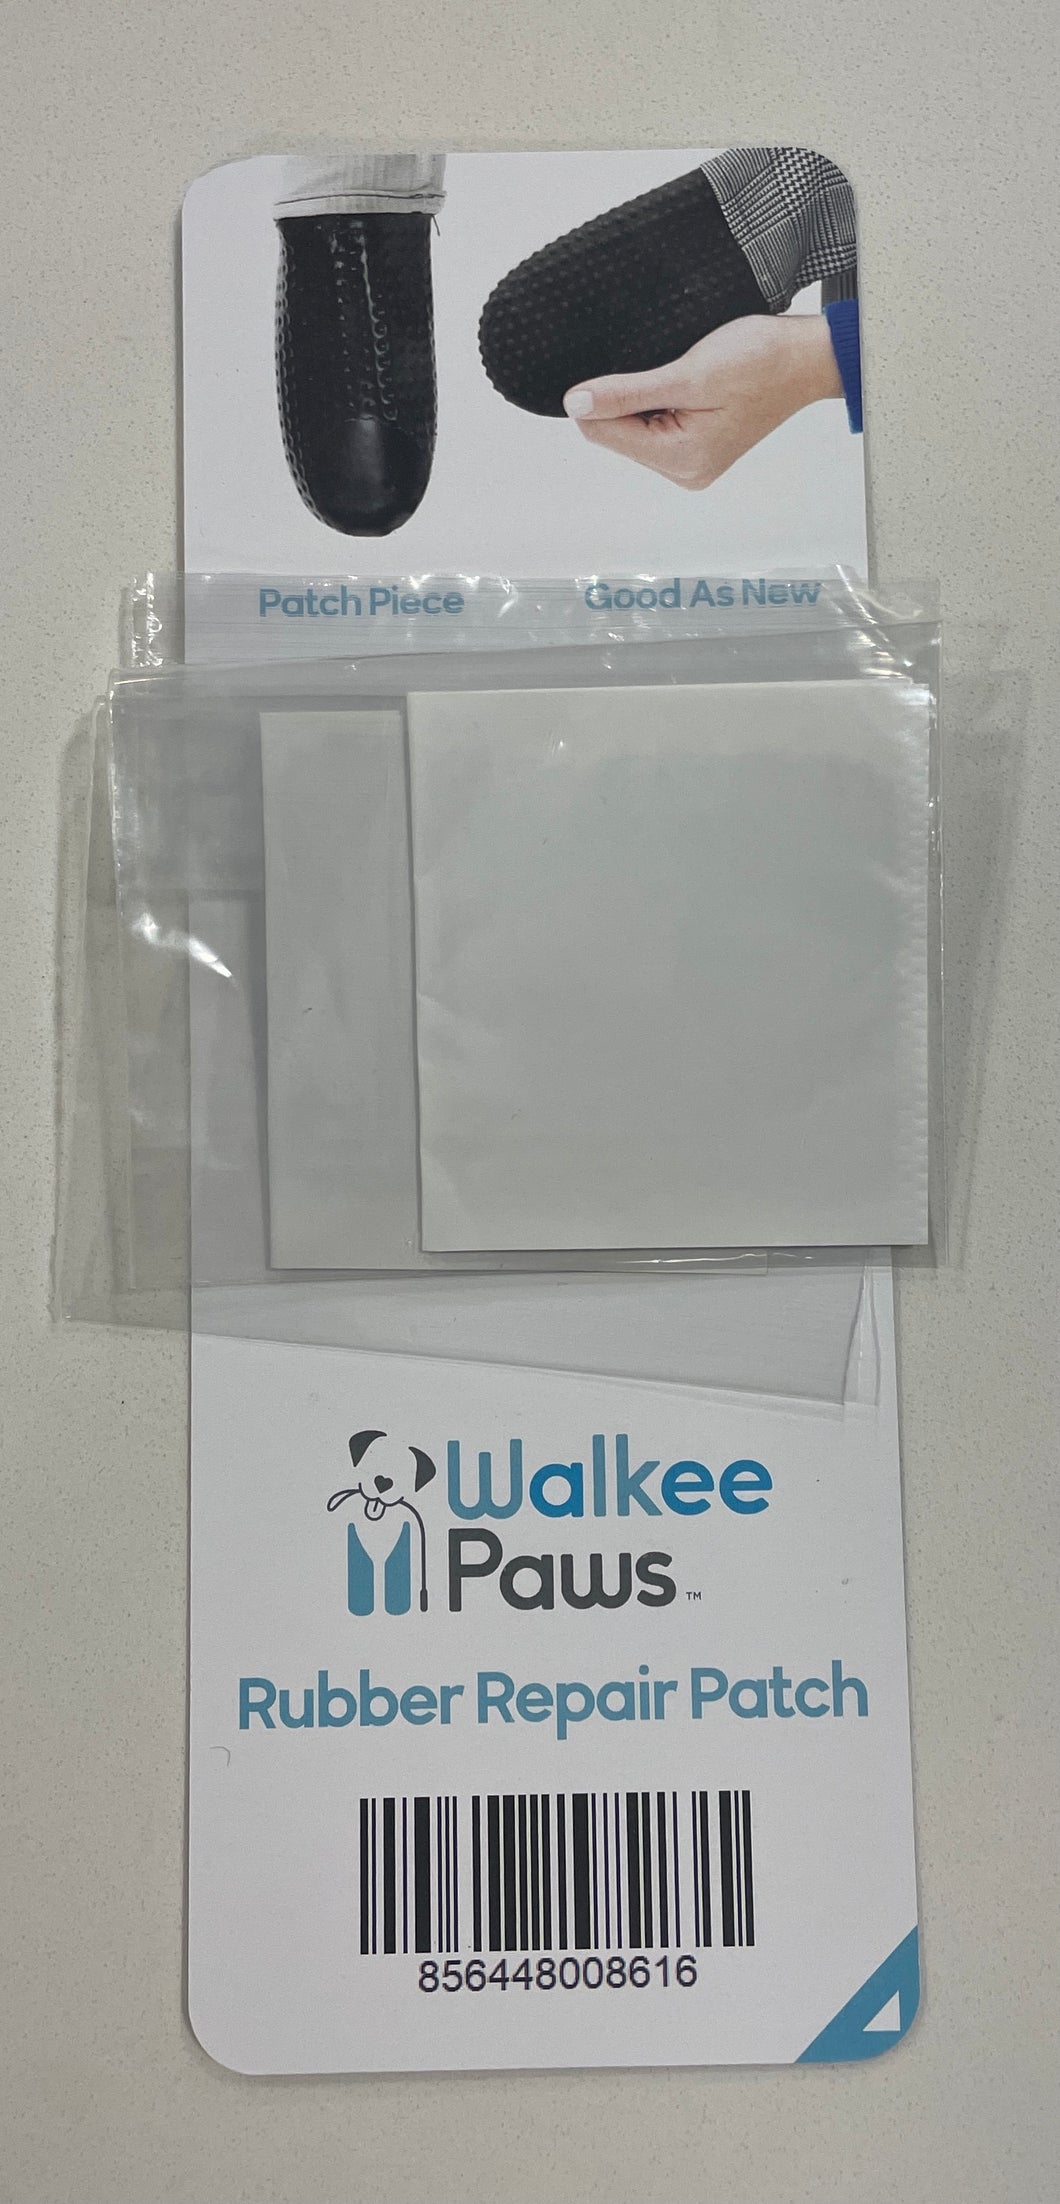 Walkee Paws - Rubber Repair Patch